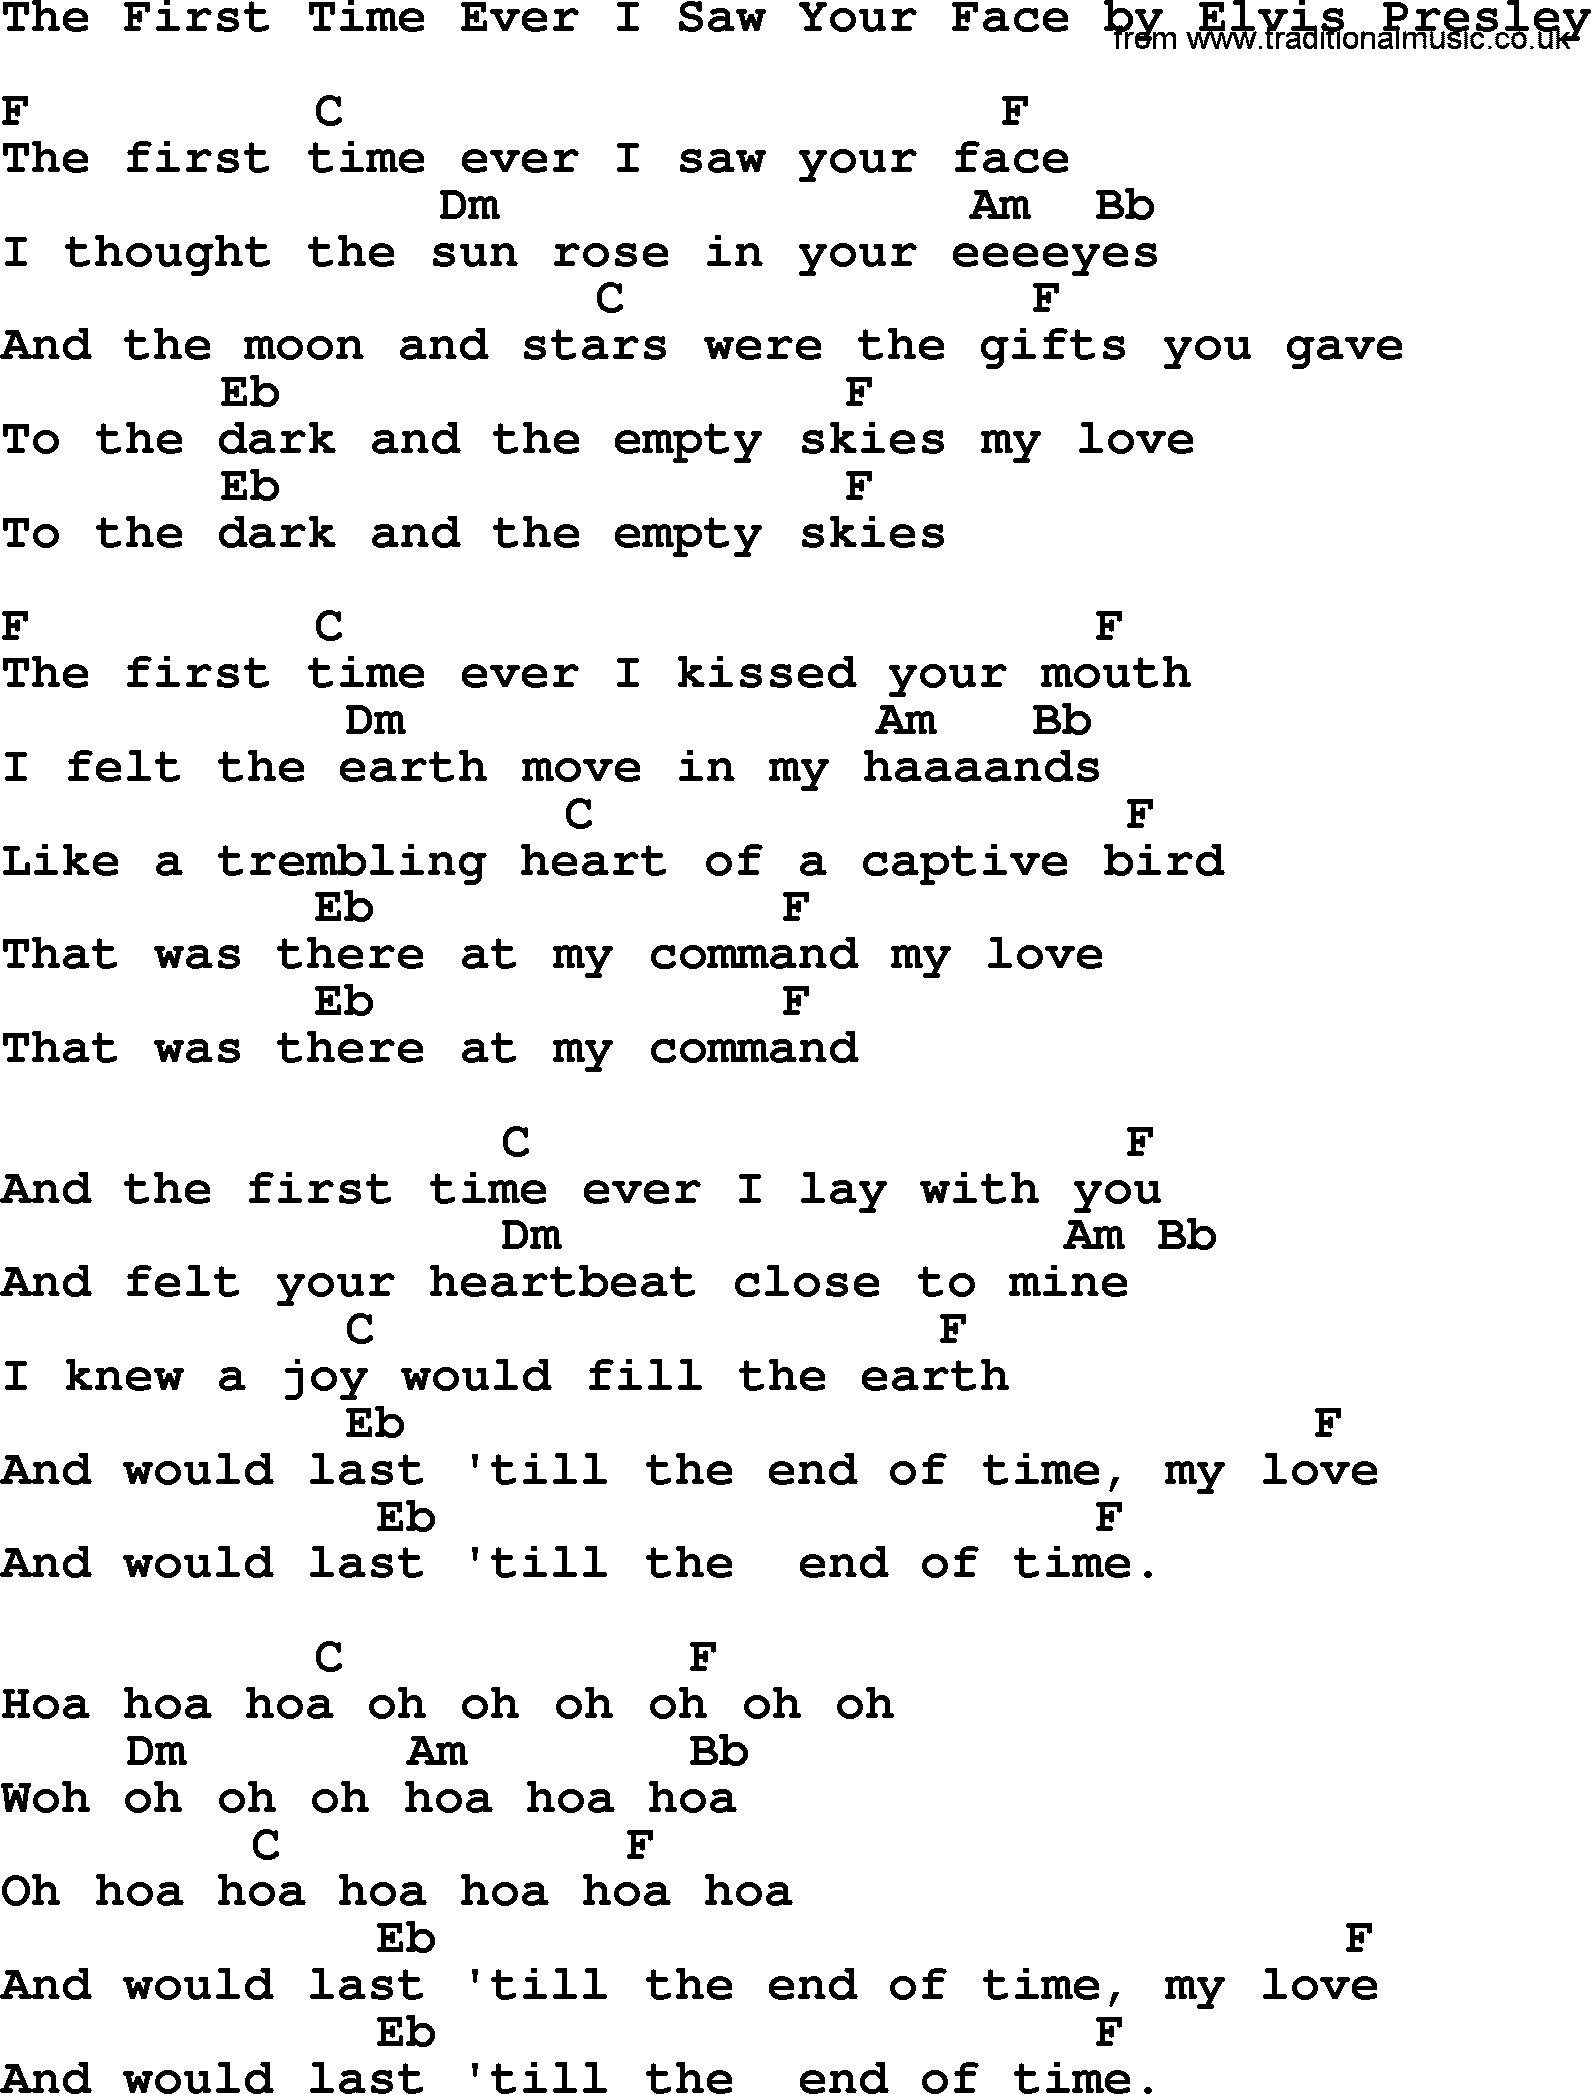 Elvis Presley song: The First Time Ever I Saw Your Face, lyrics and chords